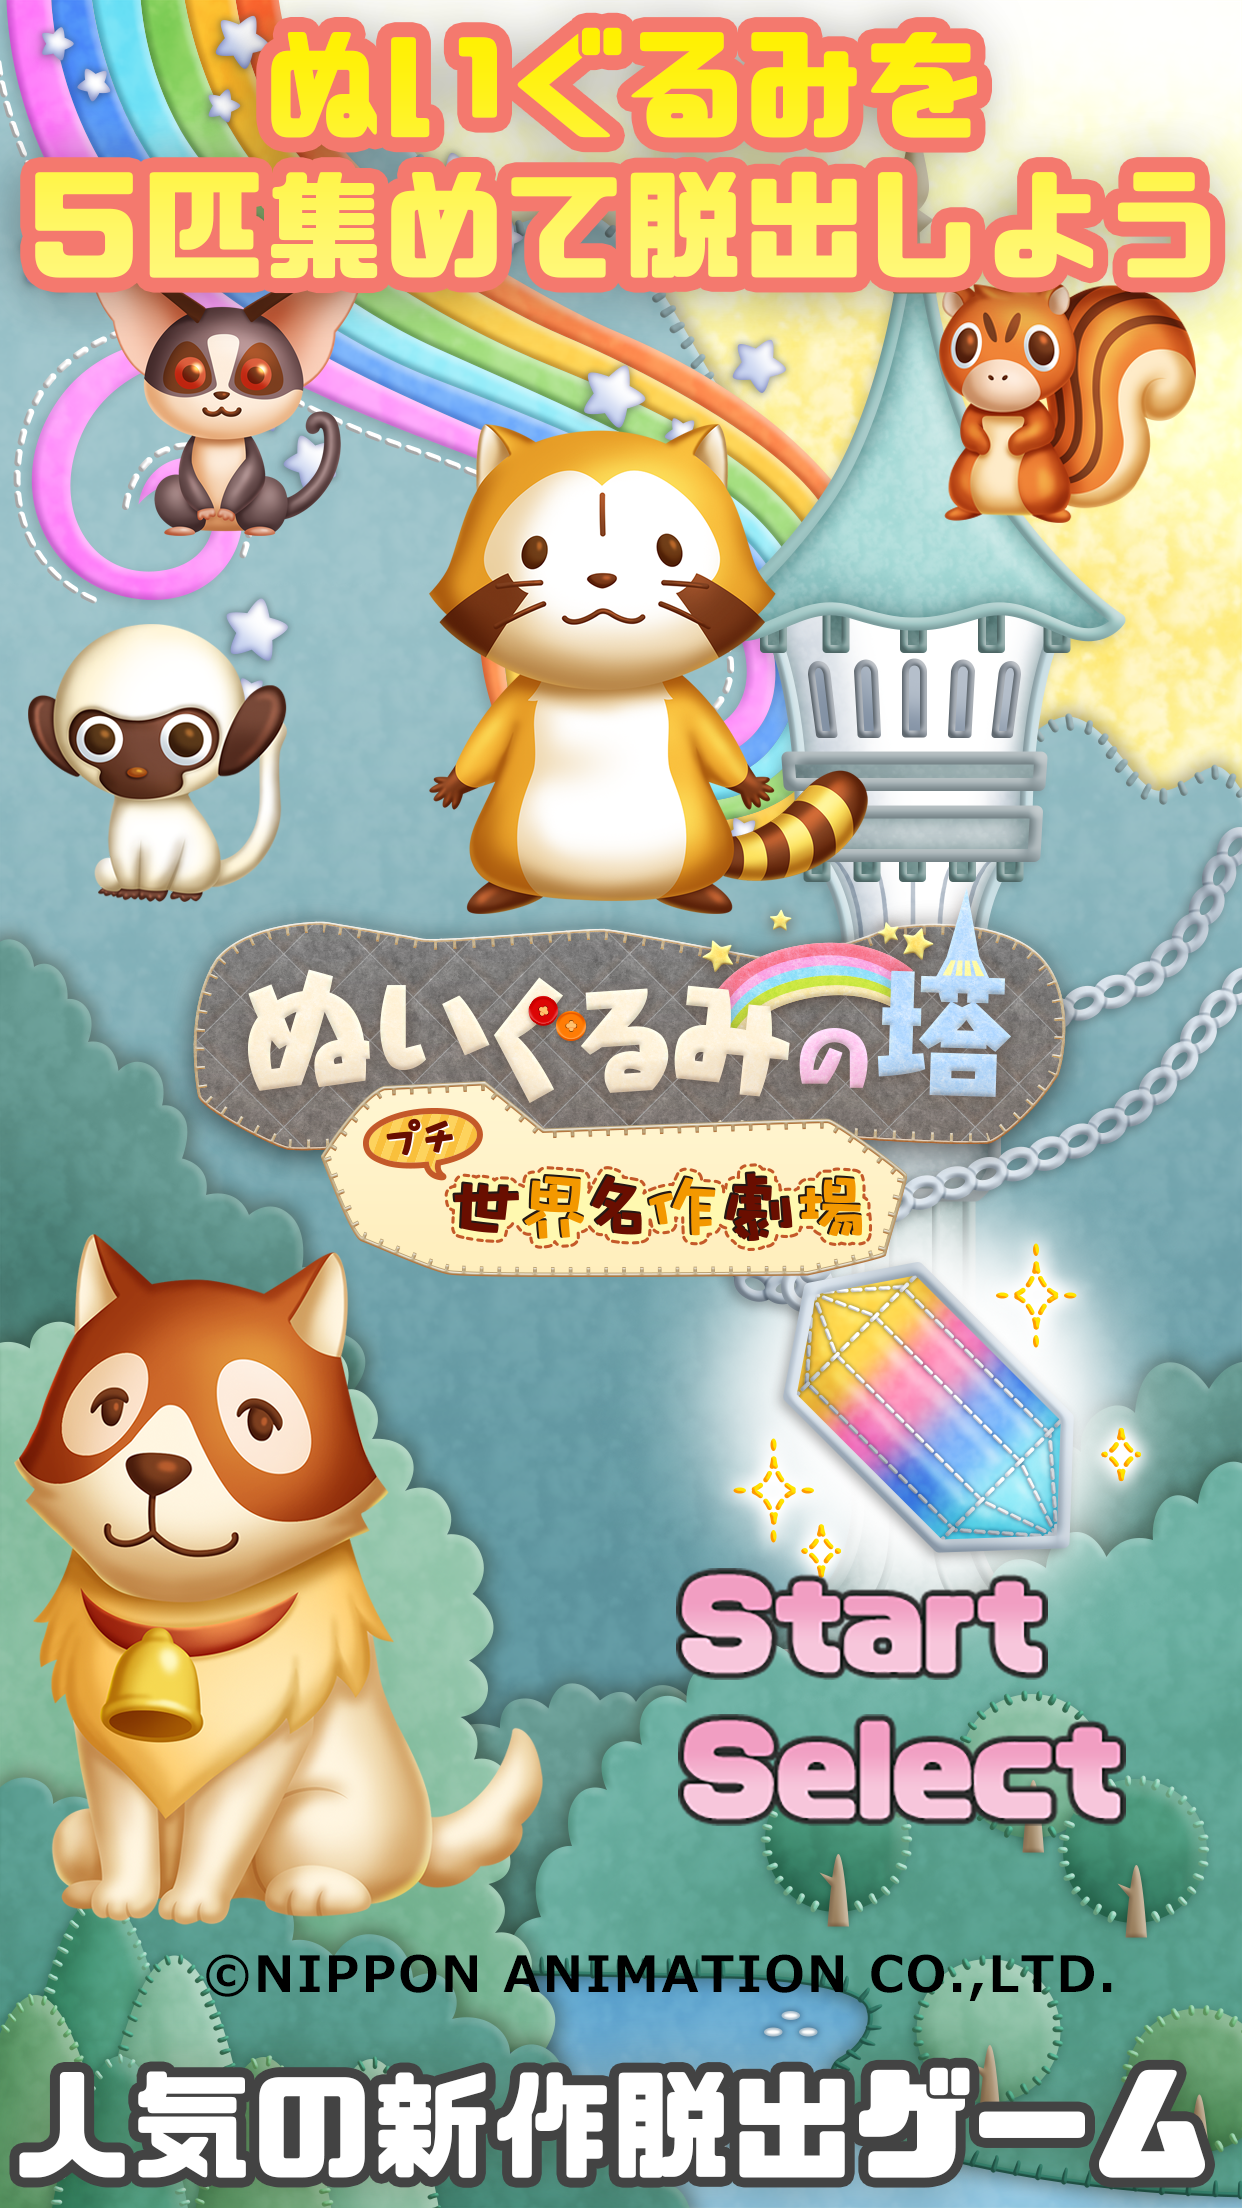 Screenshot 1 of Escape Game-Stuffed Toy Tower Petit World Masterpiece Teater Edisi- 1.0